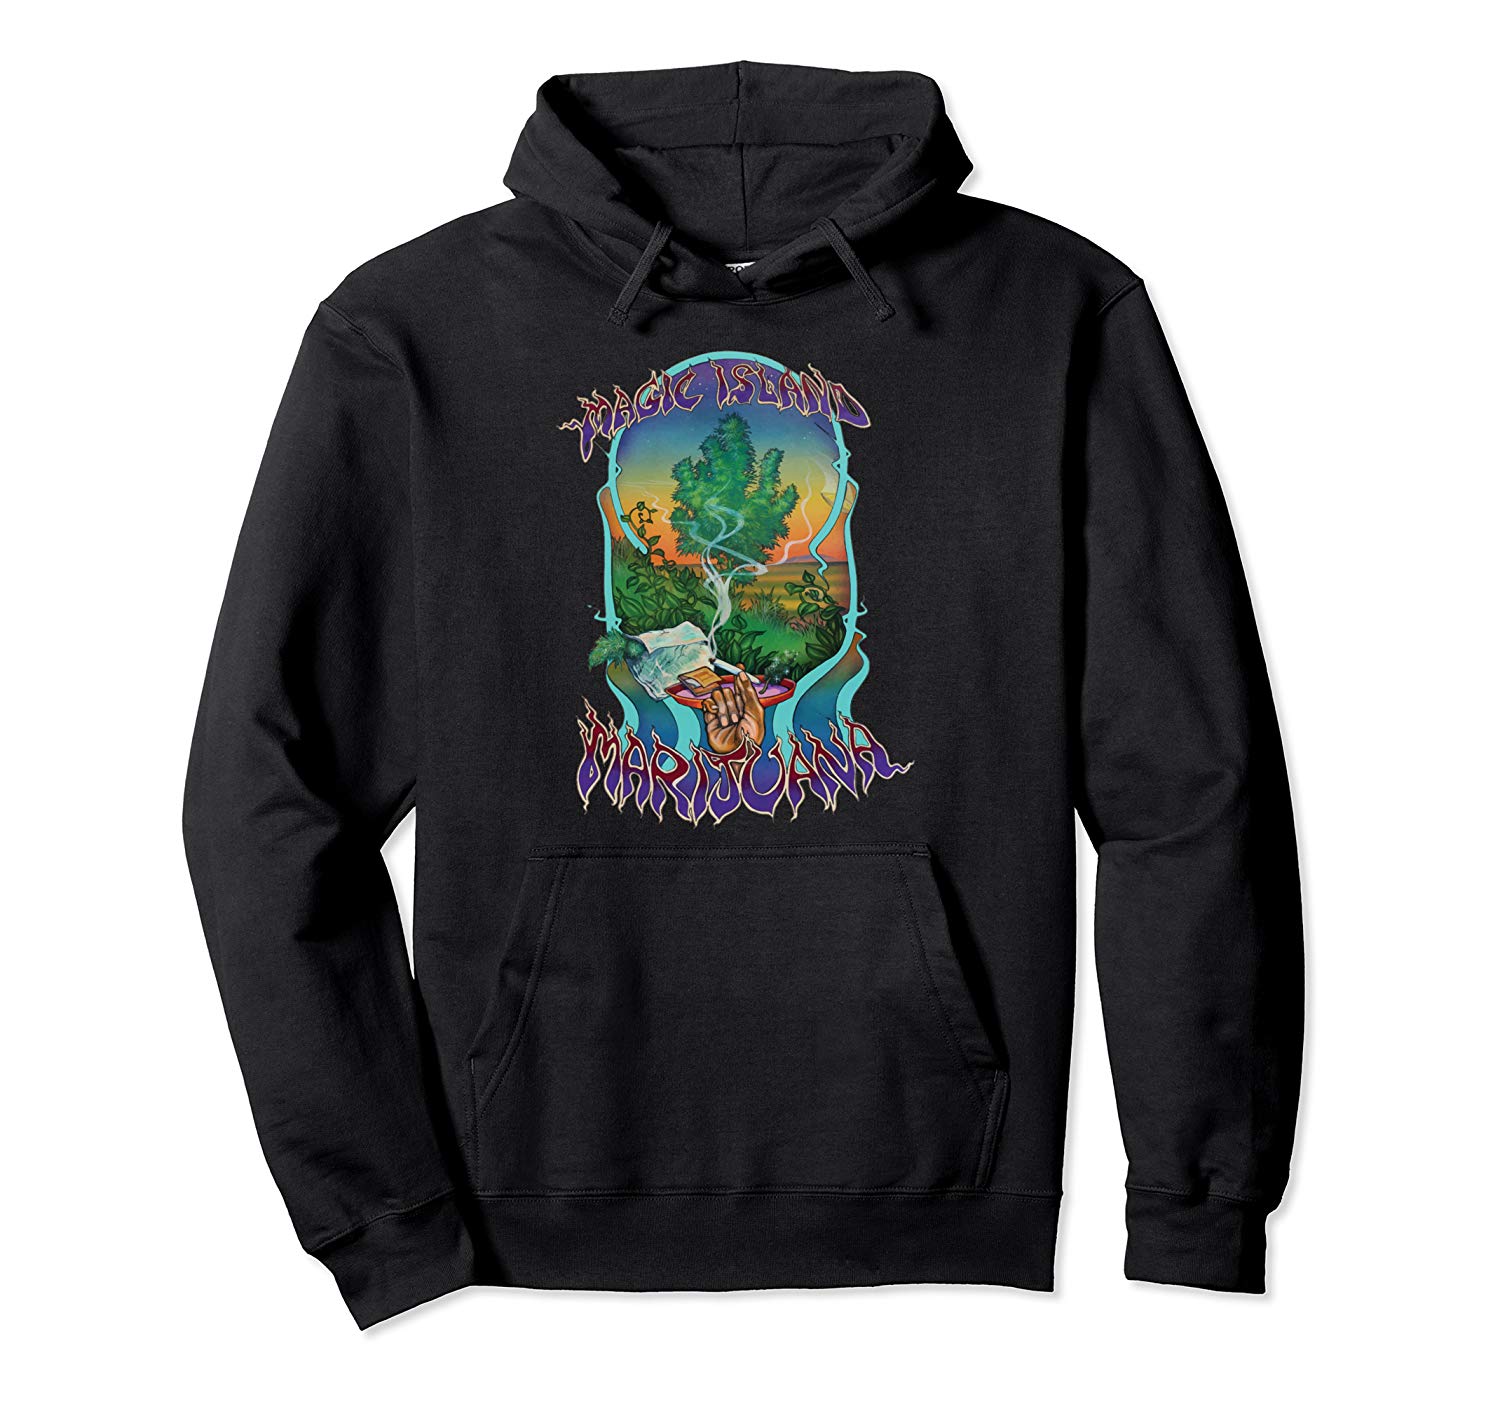 An image of a black magic island marijuana pullover hoodie available at GanjaOutpost.com